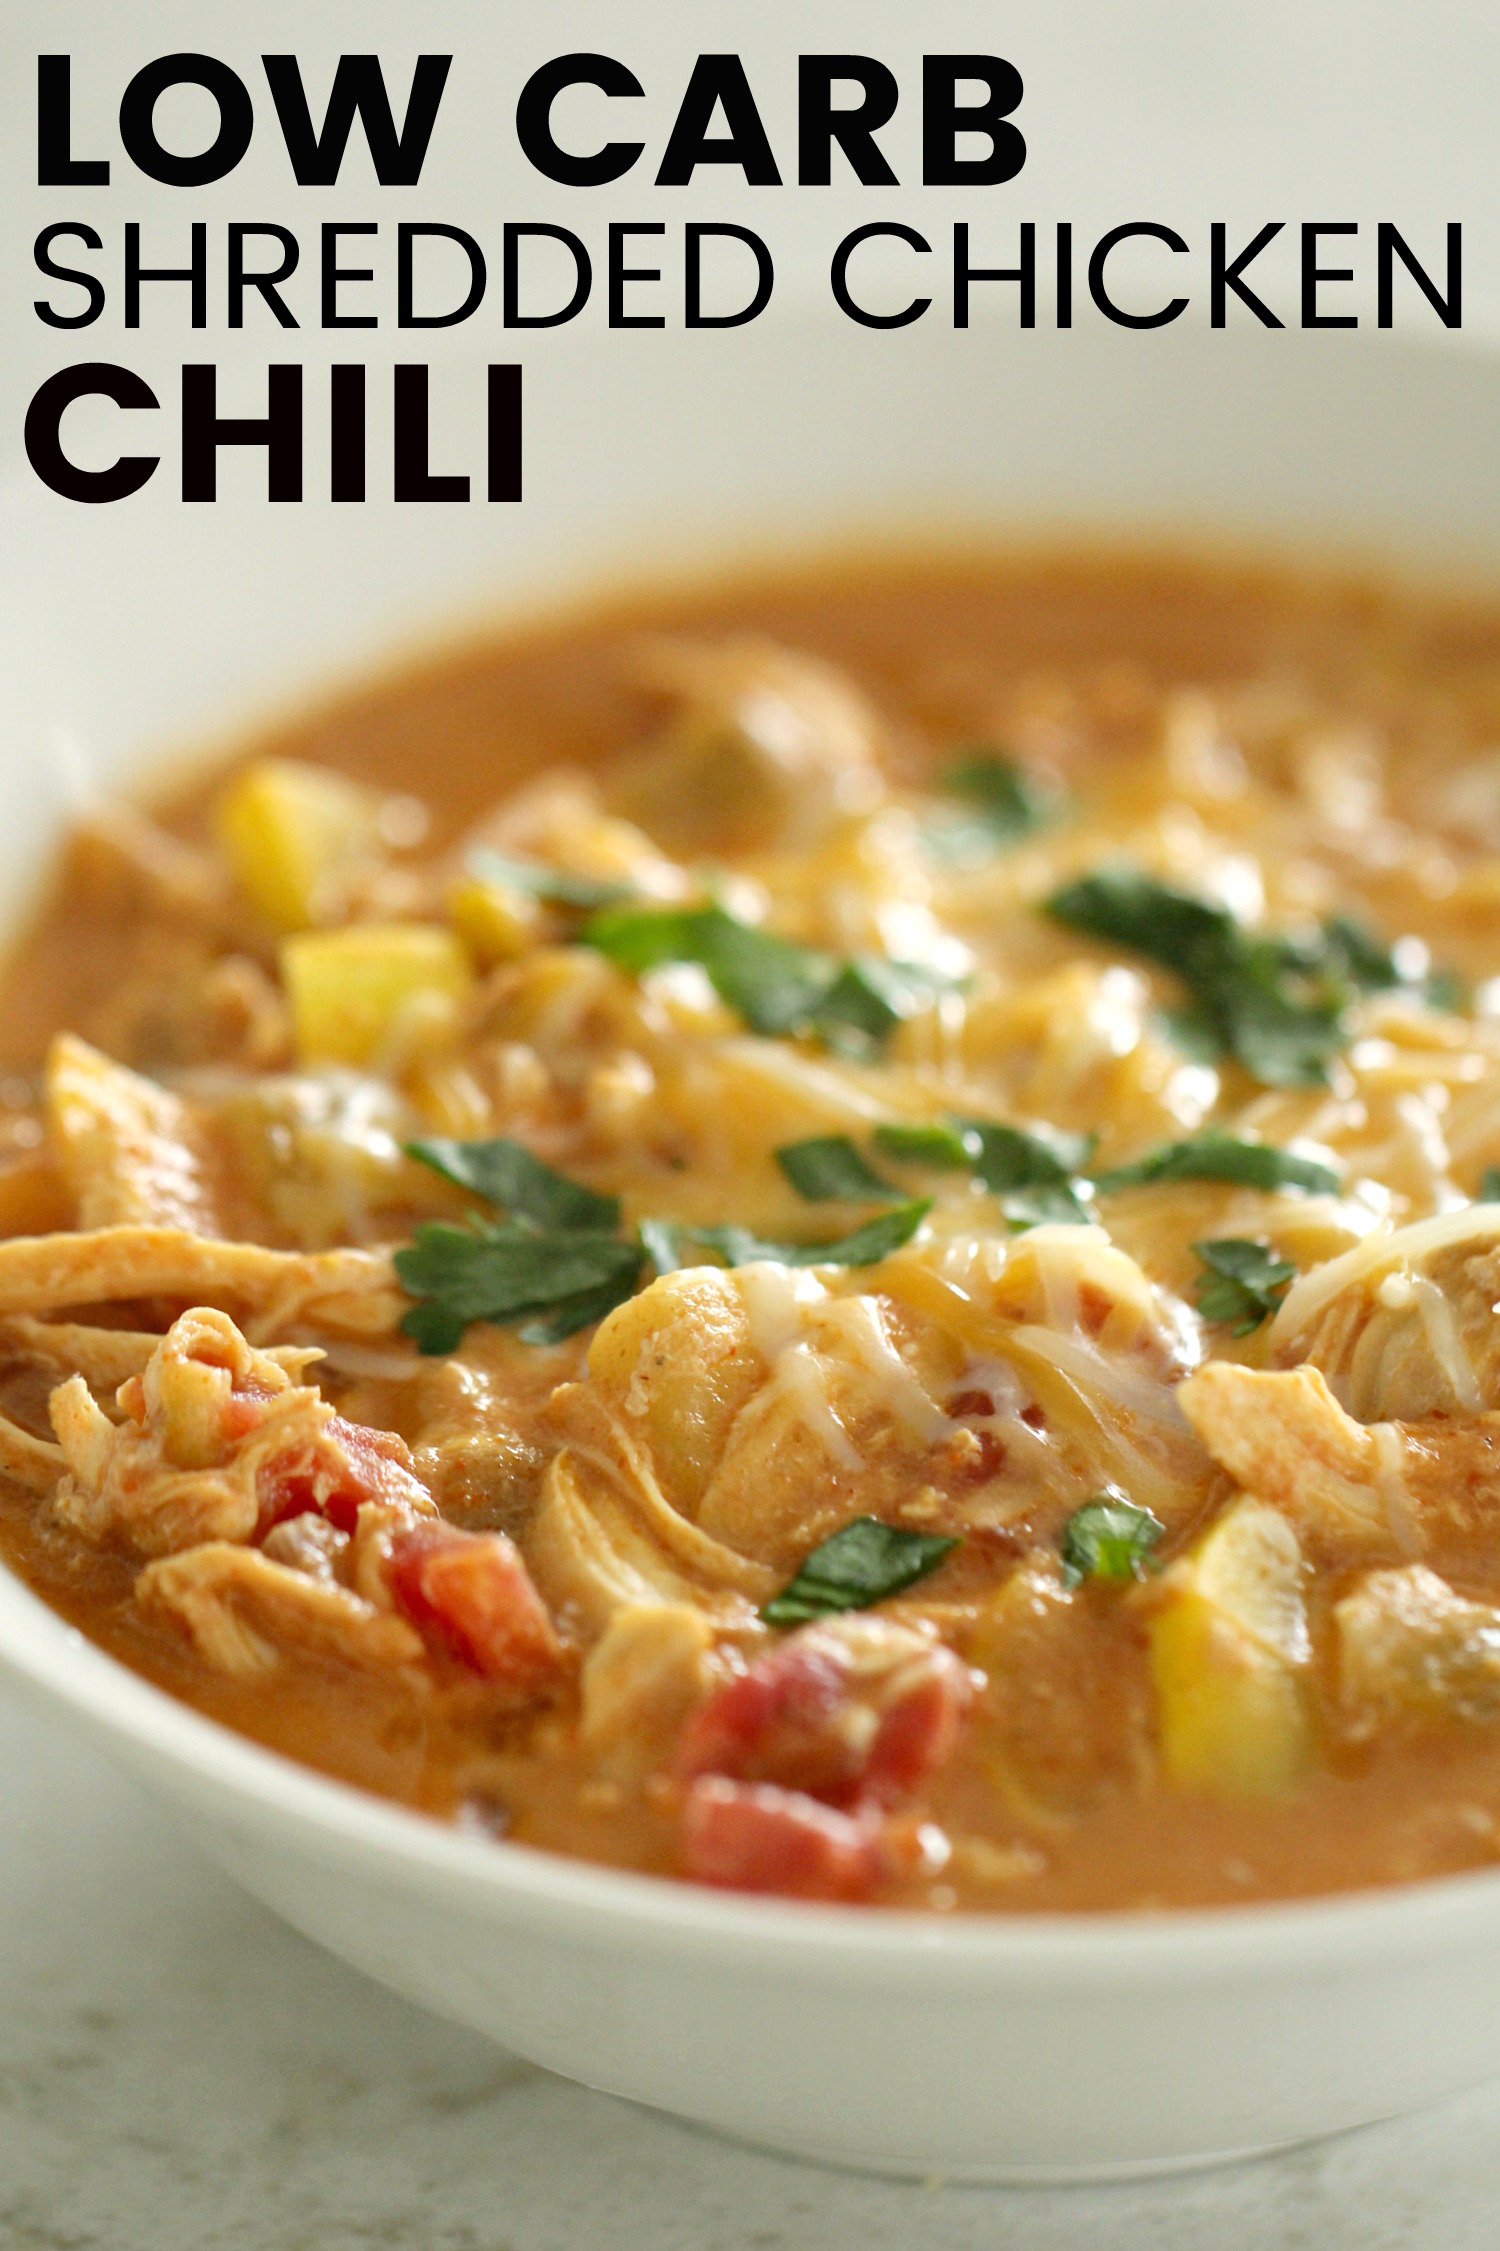 Low Carb Shredded Rotisserie Chicken Chili